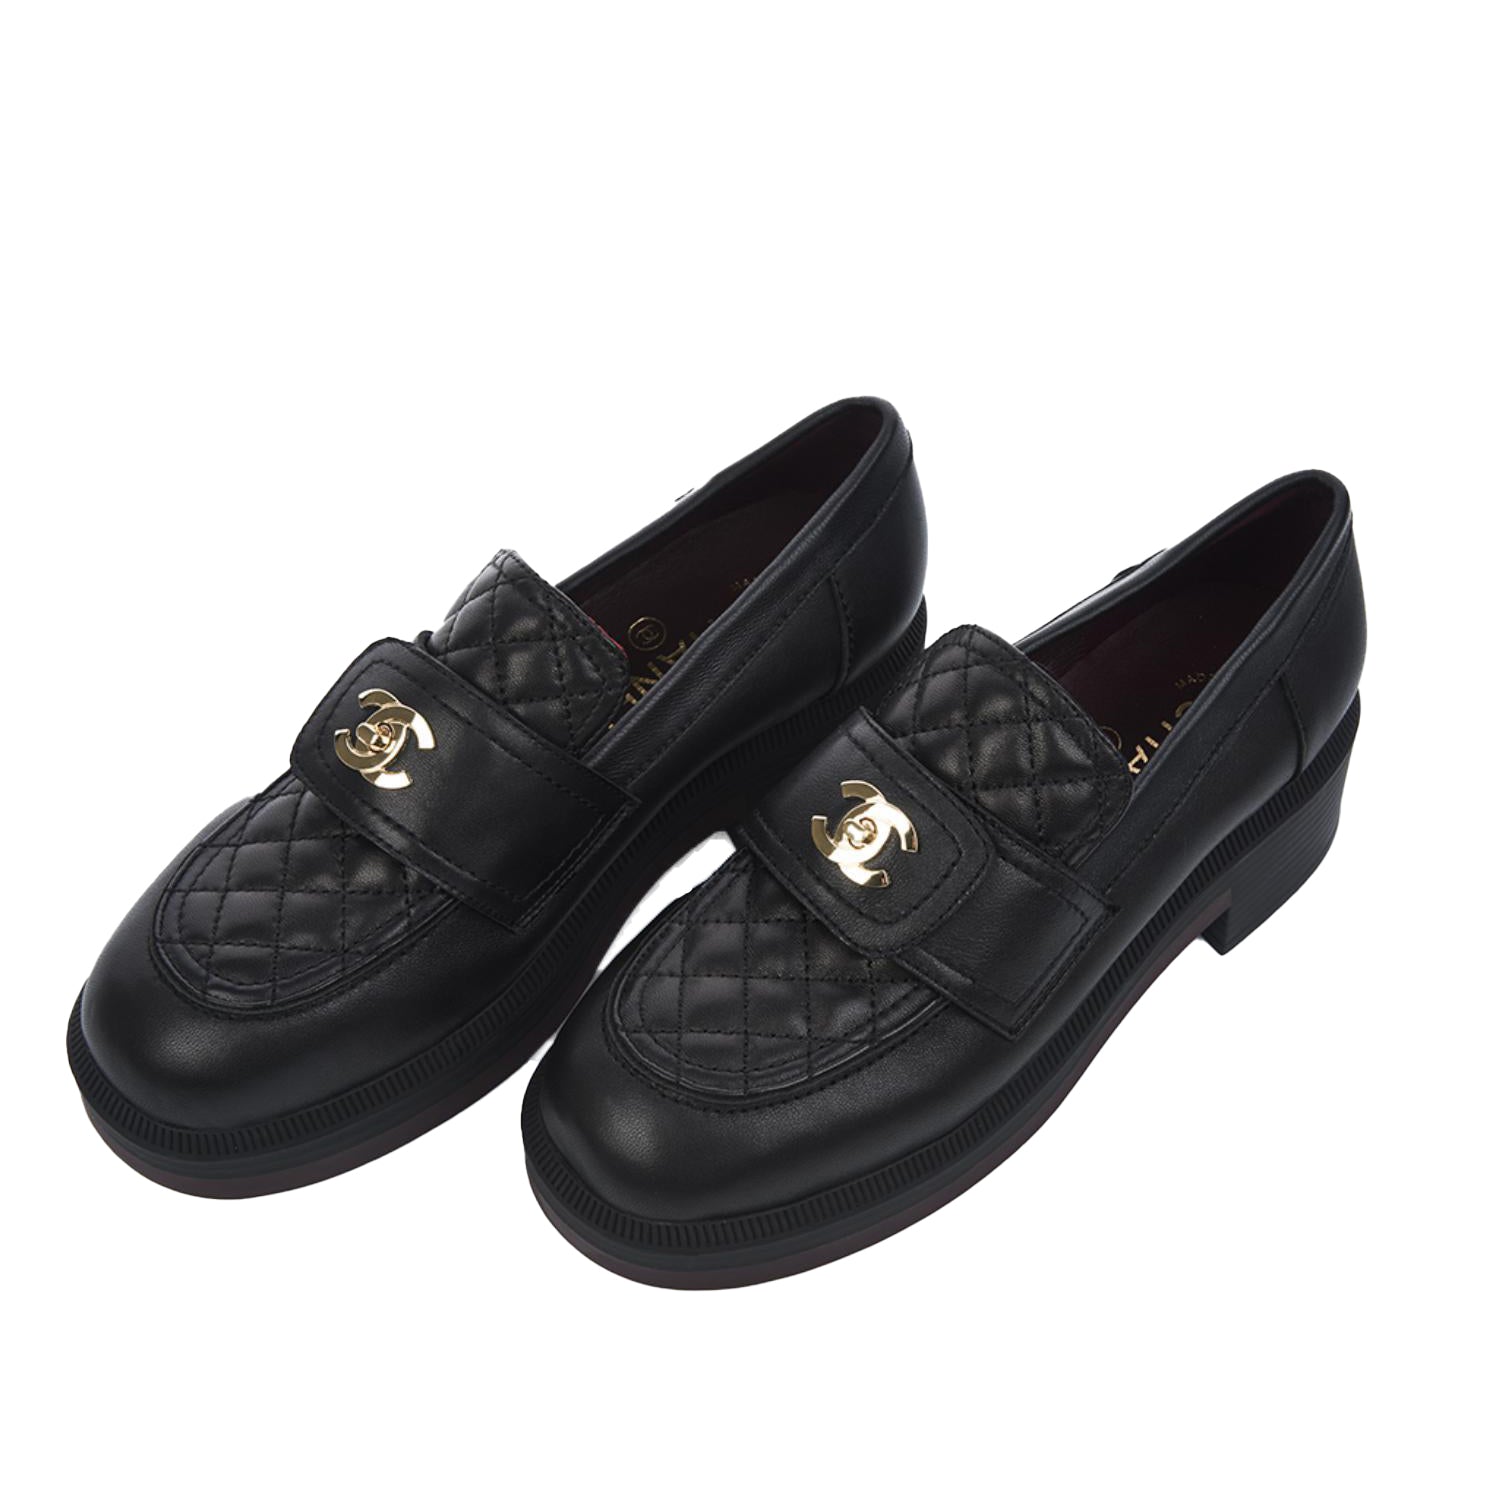 Chanel Lambskin Quilted CC Turnlock Loafers Black - Size 38 EU / 8 US